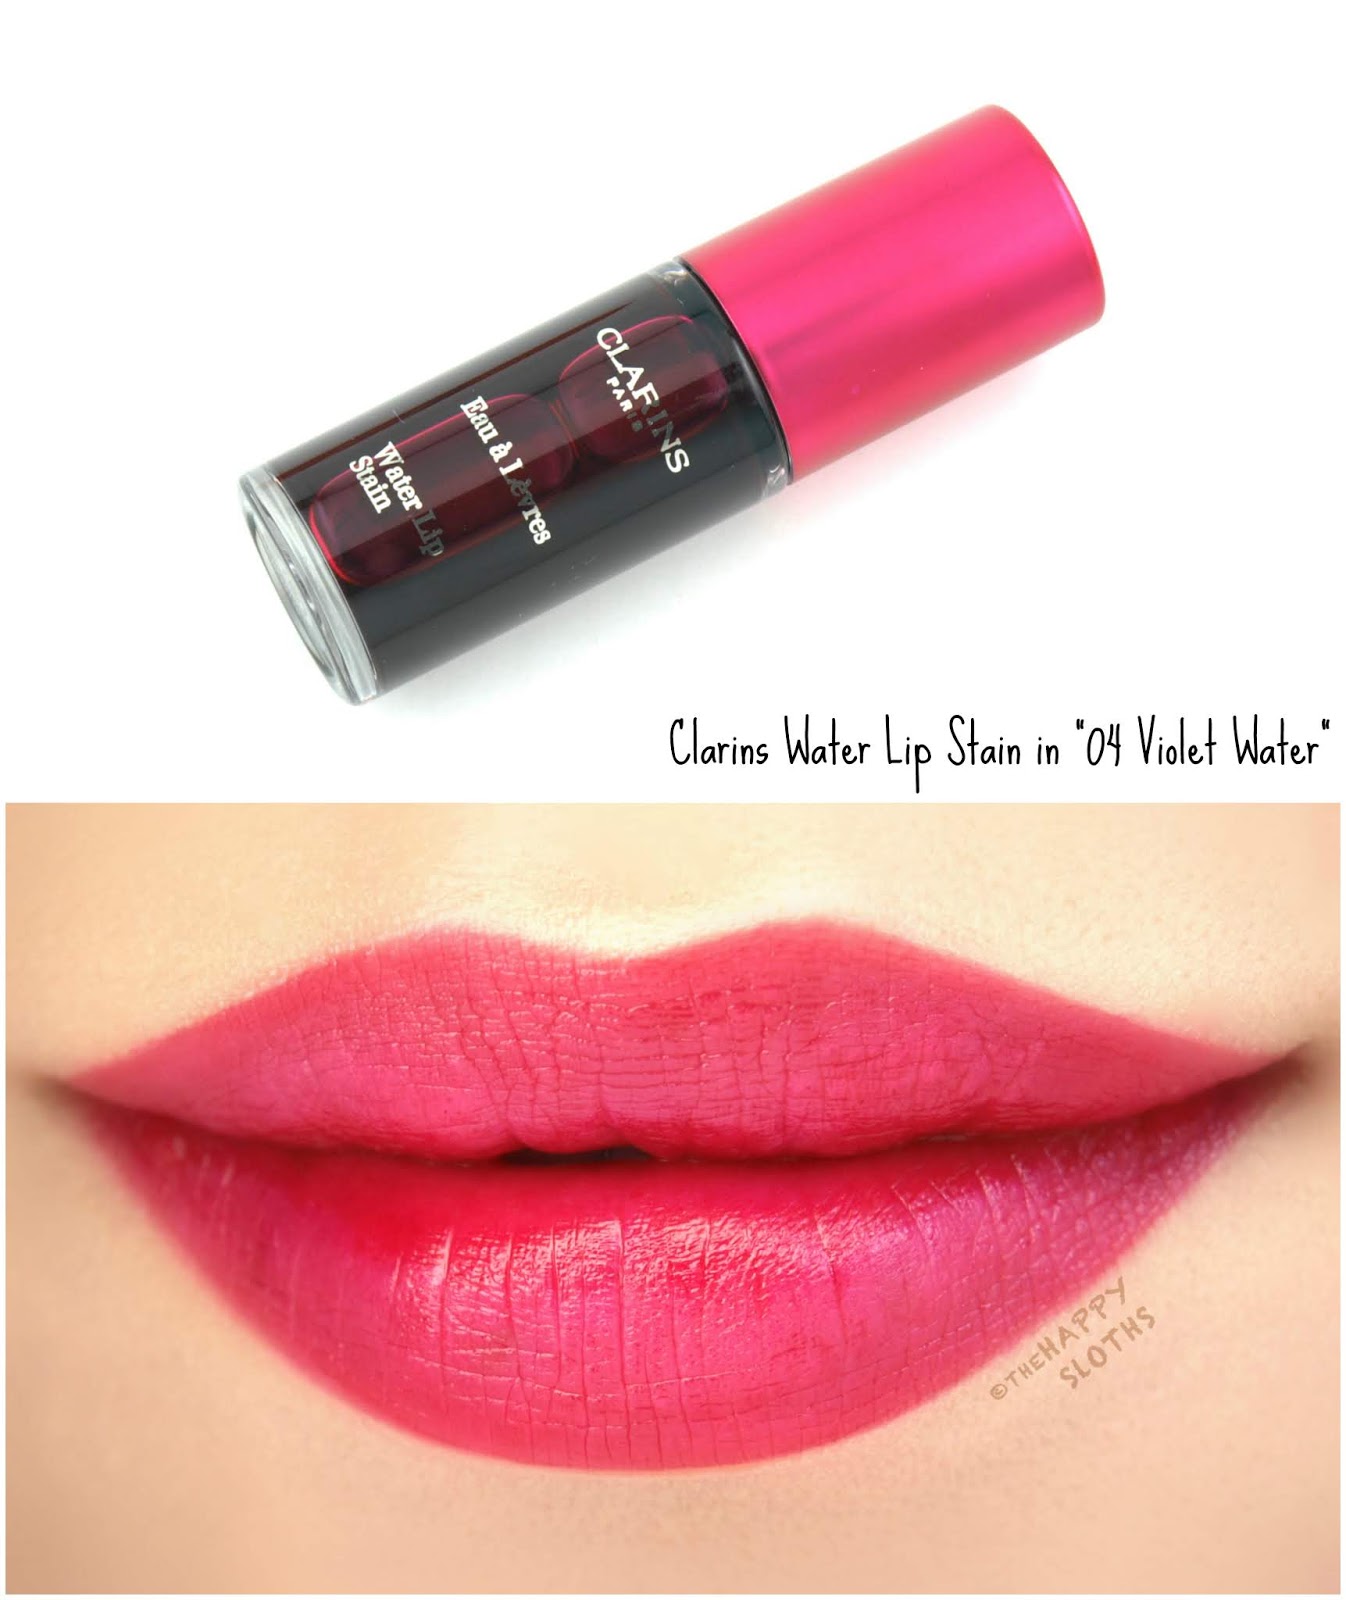 Clarins | Water Lip Stain in "04 Violet Water": Review and Swatches